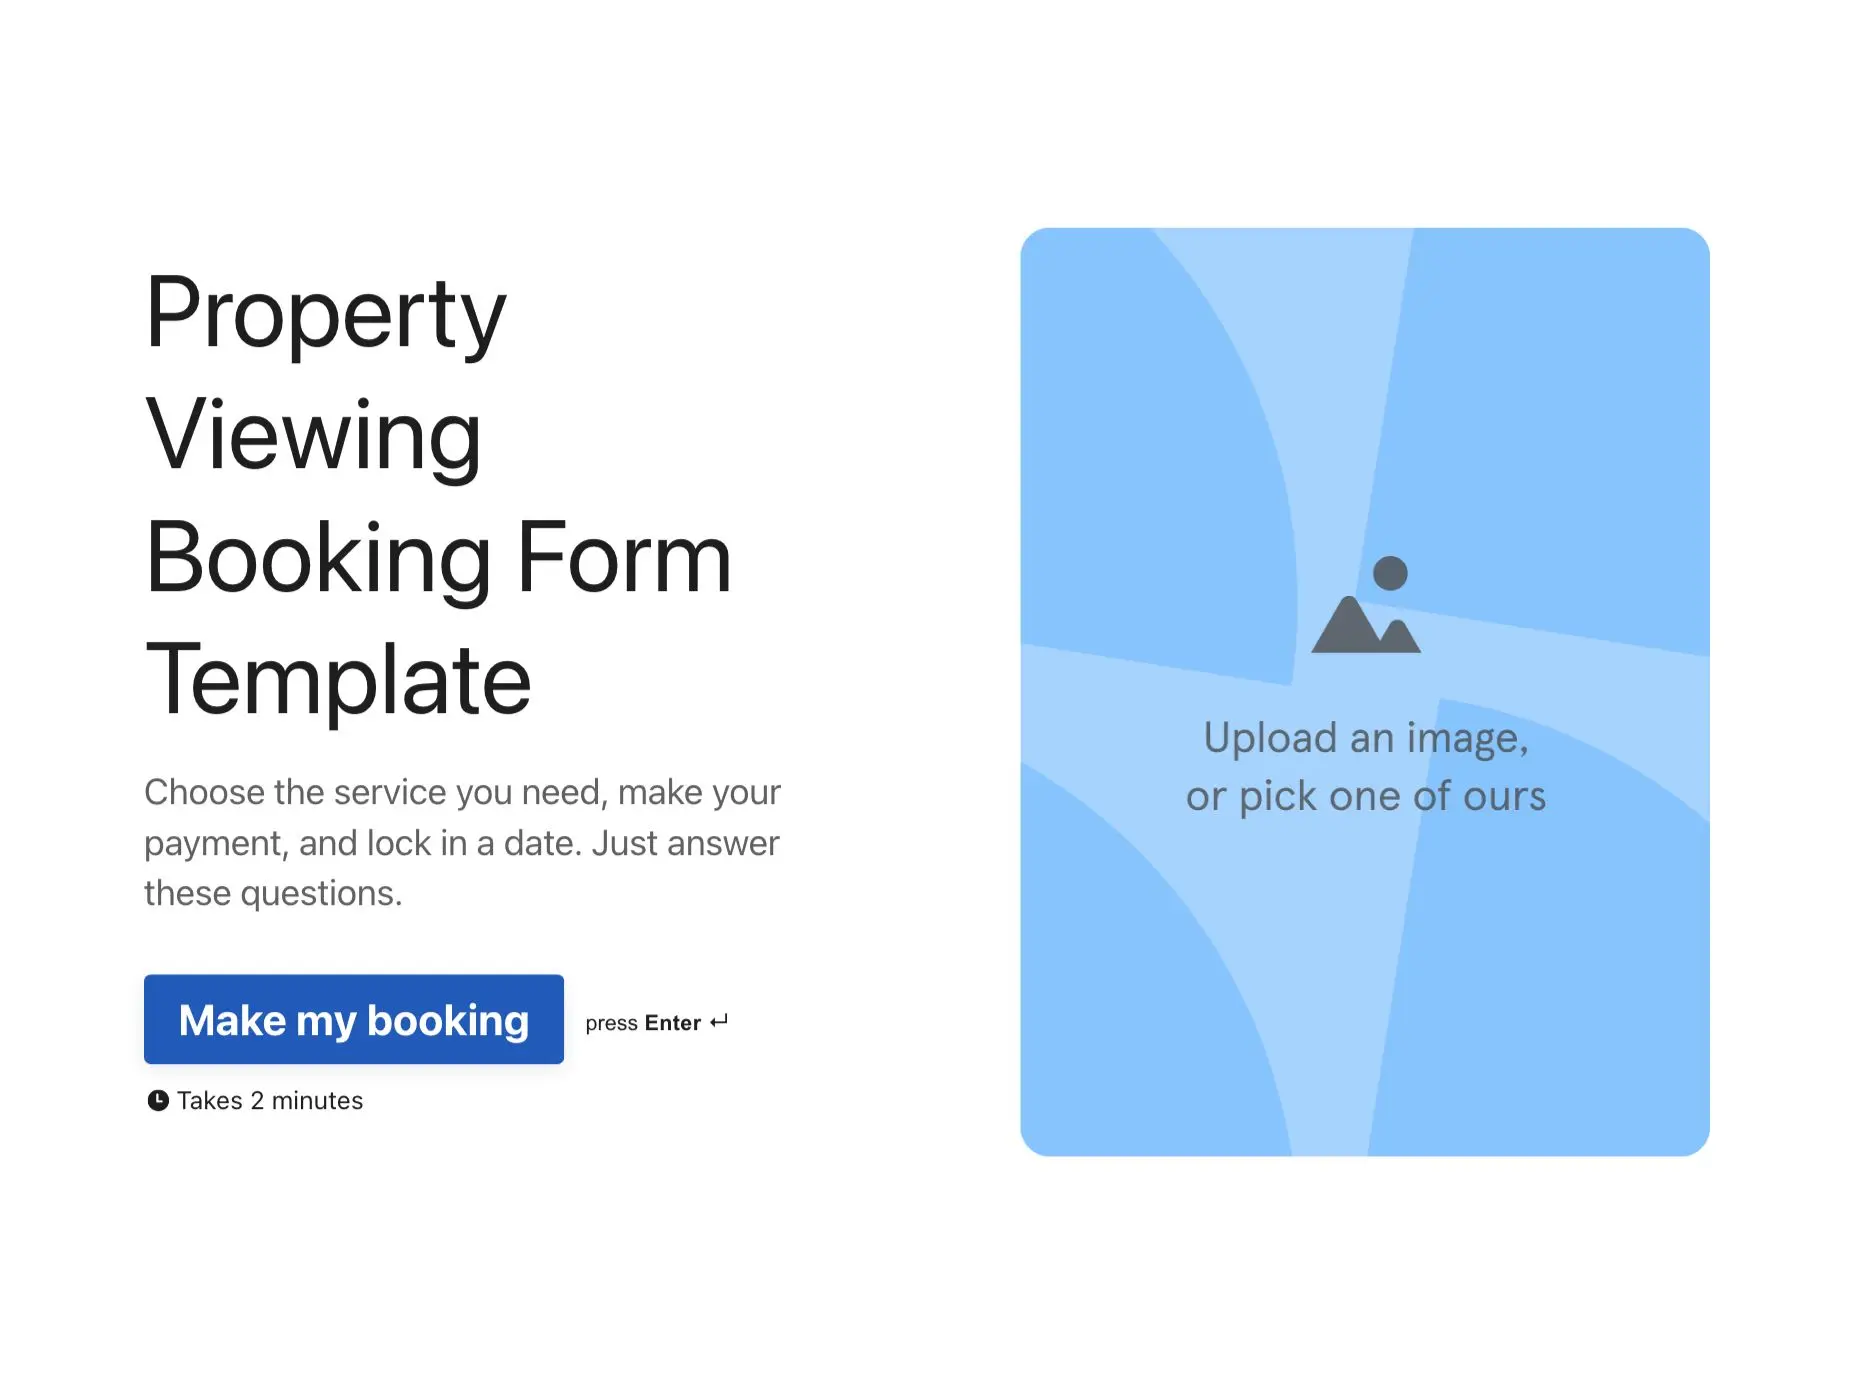 Property Viewing Booking Form Template Hero